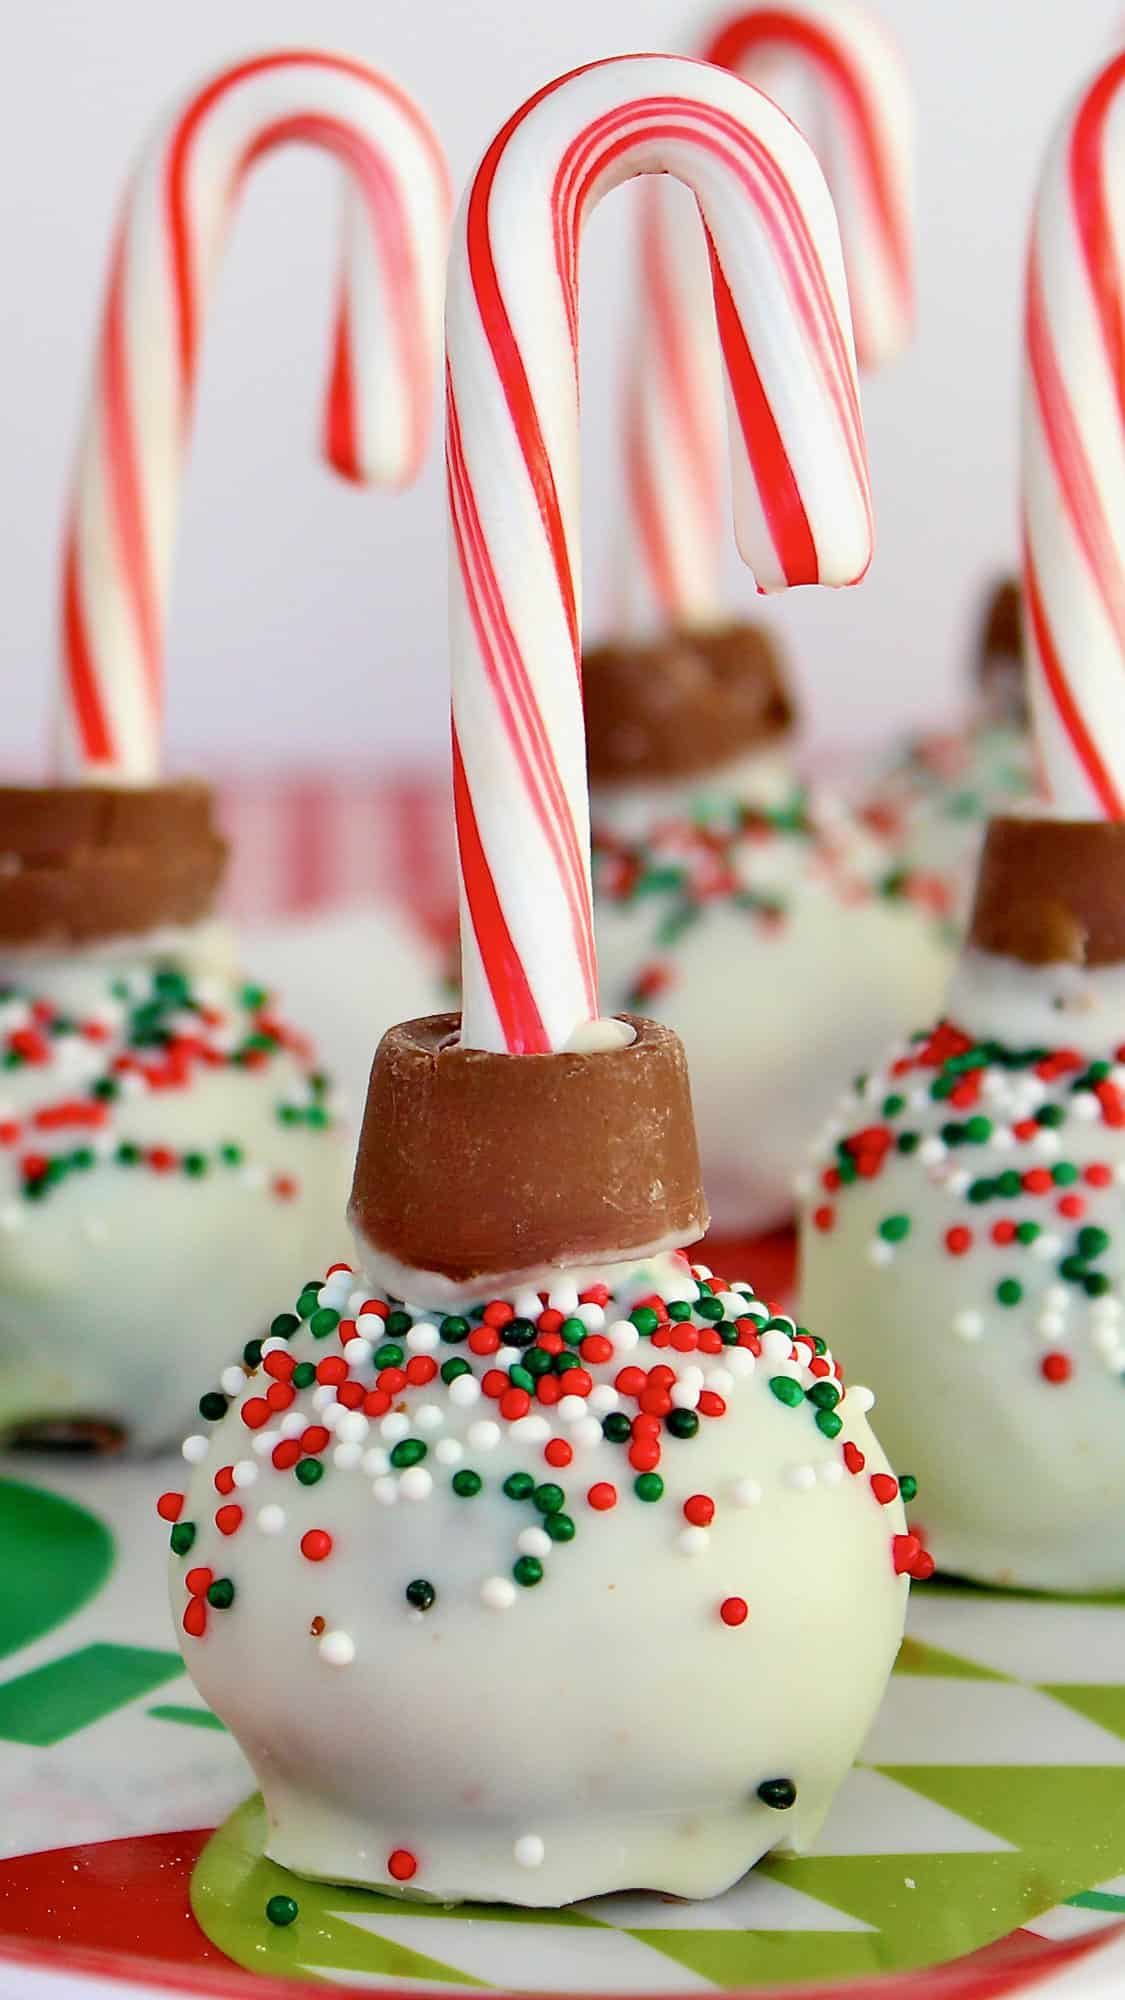 Christmas treats that look like ornaments, with a mini candy cane on top.